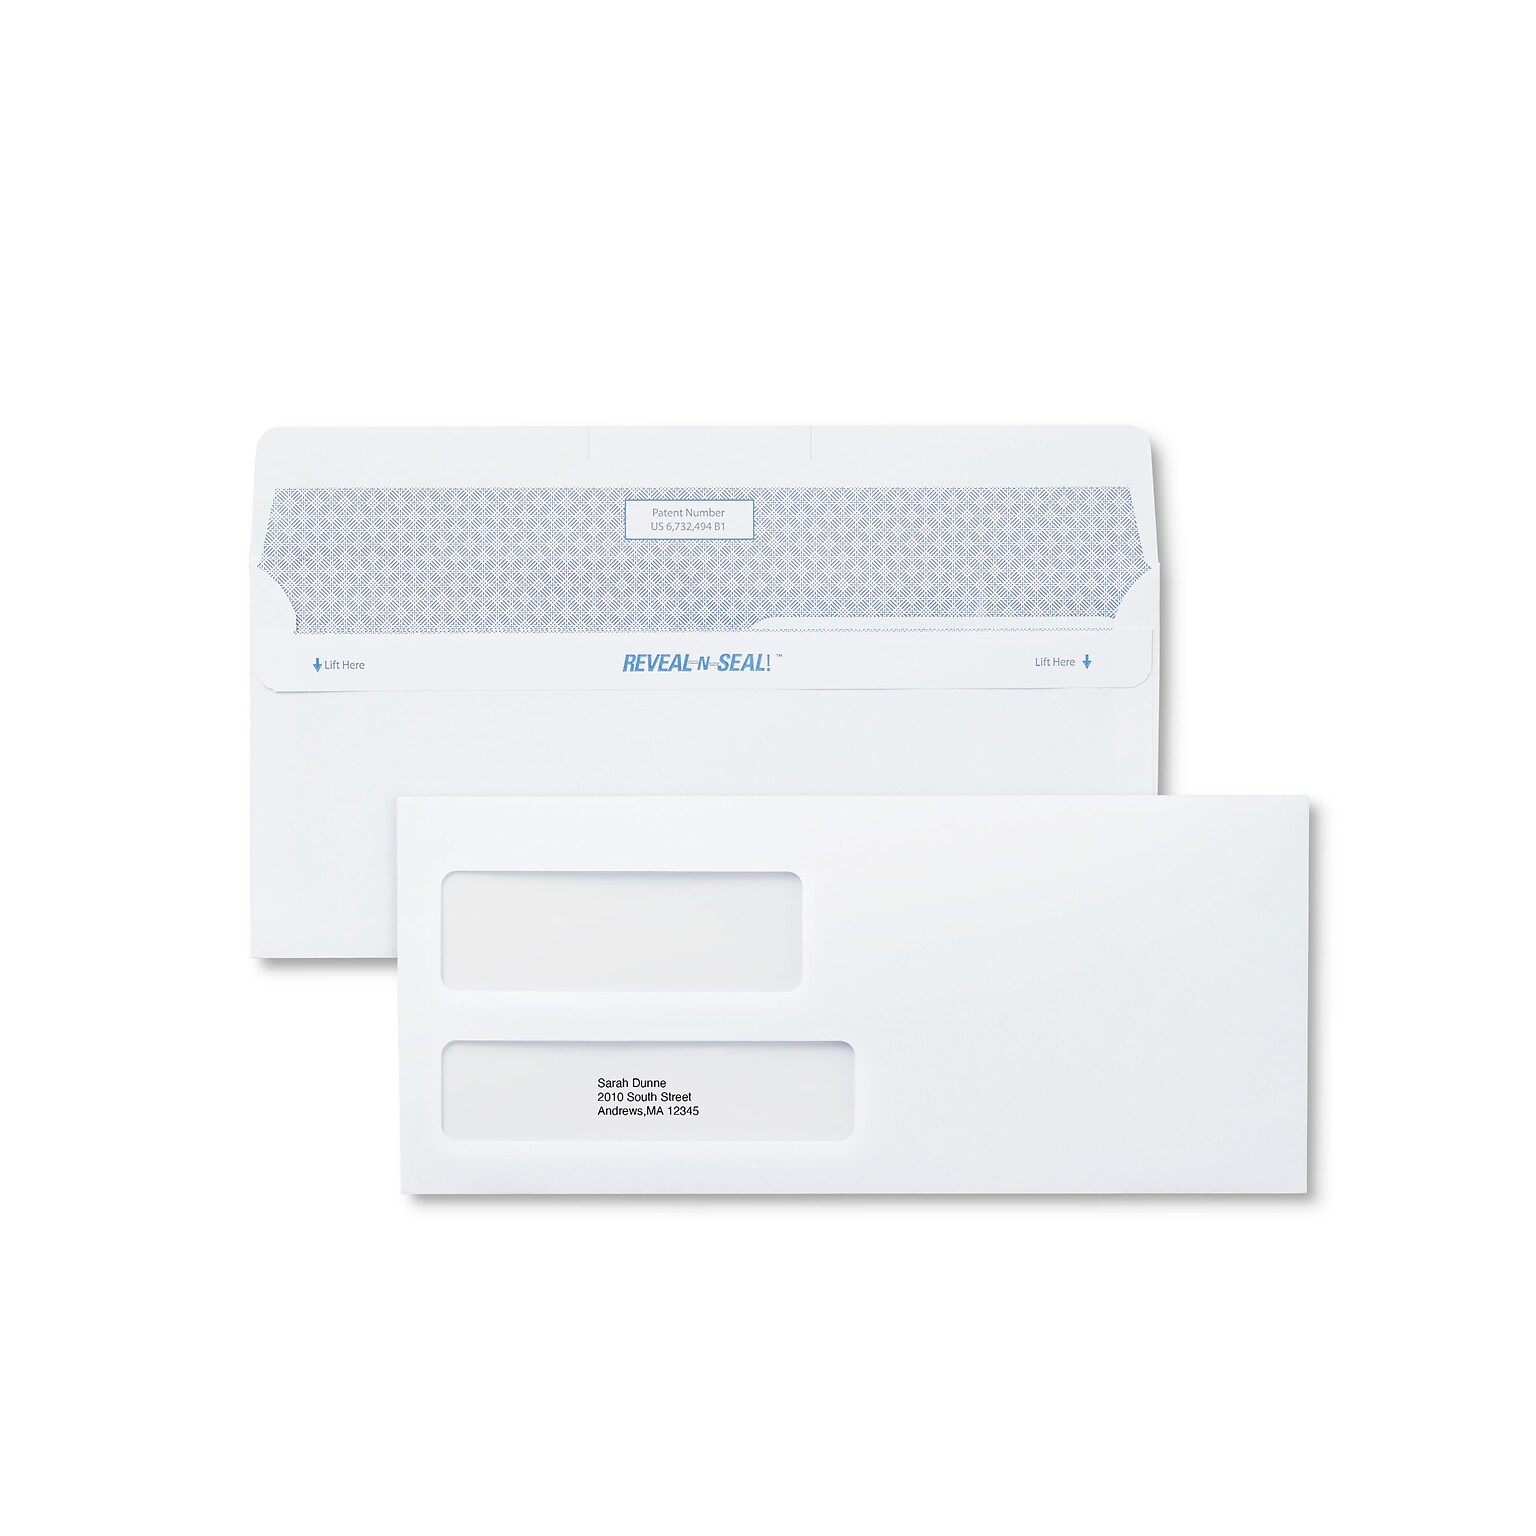 Staples Reveal-N-Seal Security Tinted #9 Business Envelopes, 3 7/8 x 8 7/8, White, 500/Box (SPL1775861)